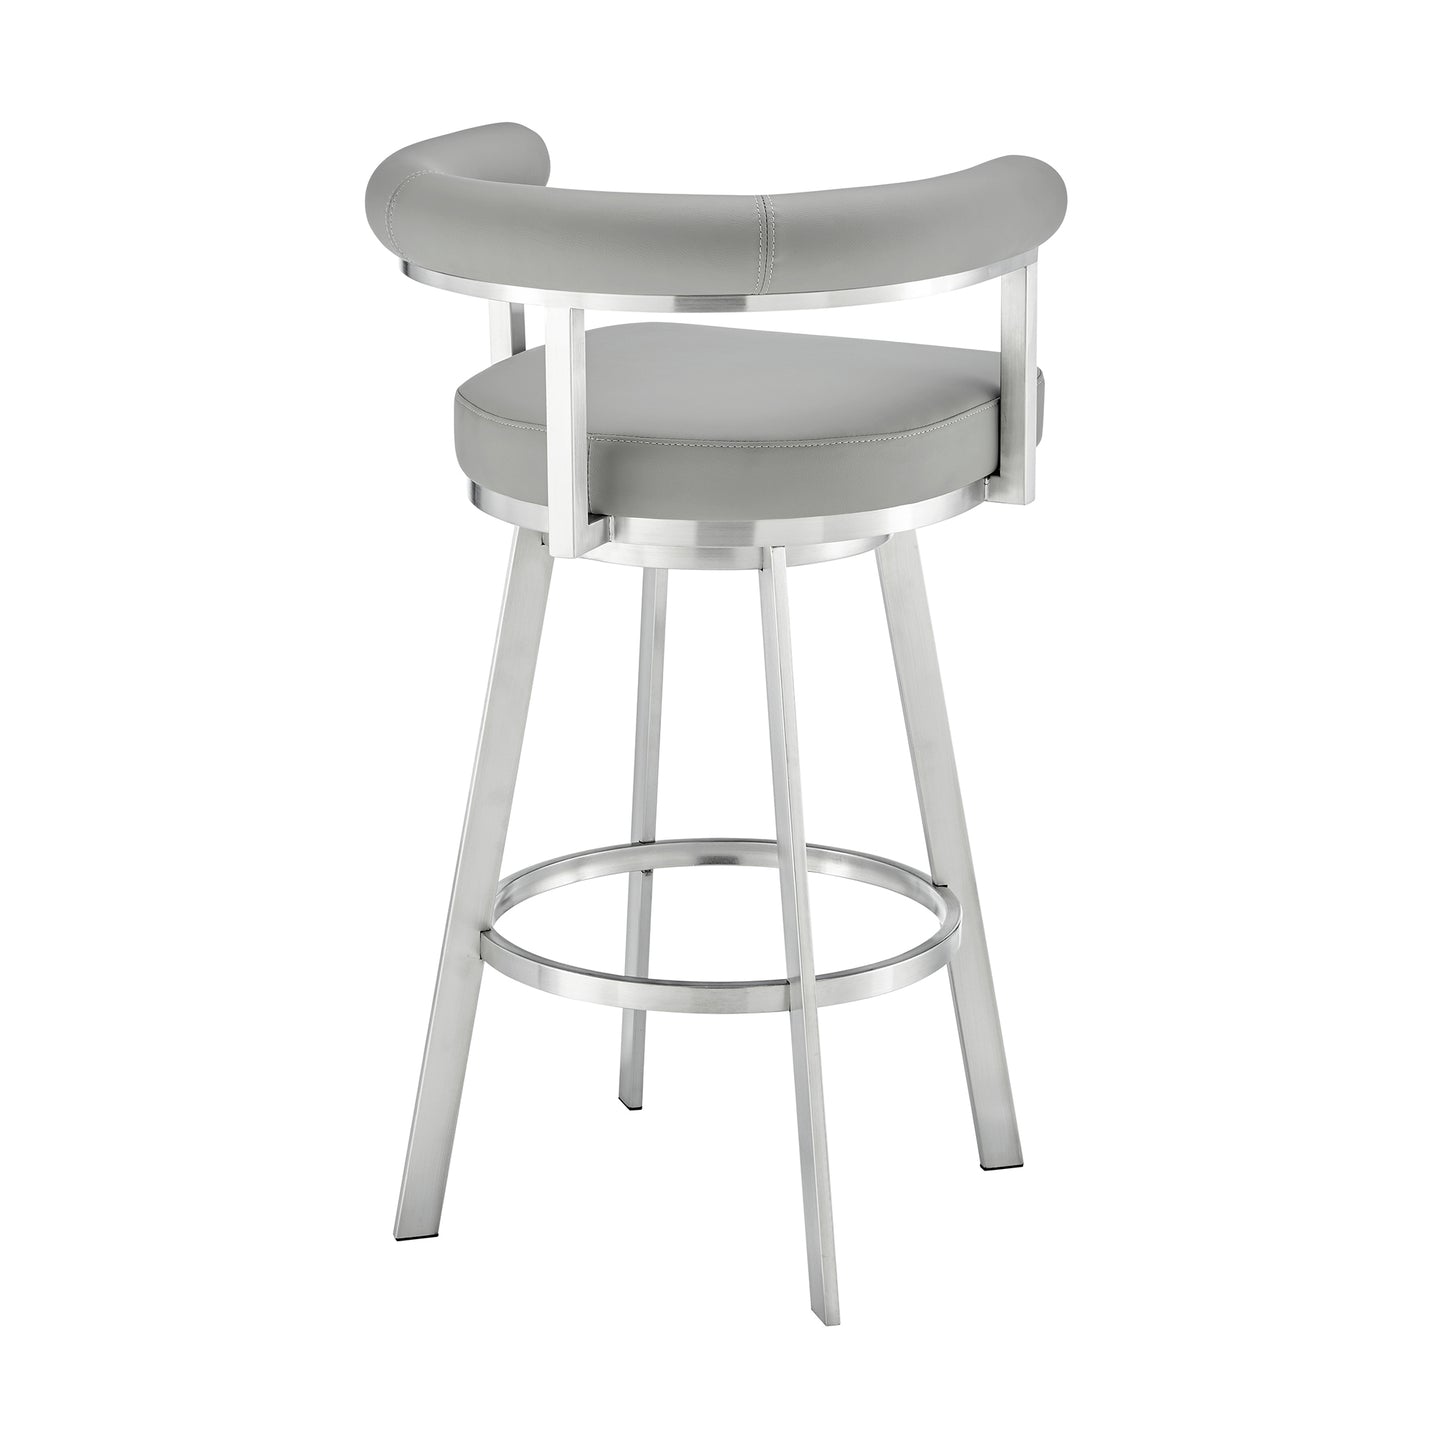 Magnolia 30" Swivel Bar Stool in Brushed Stainless Steel with Light Gray Faux Leather